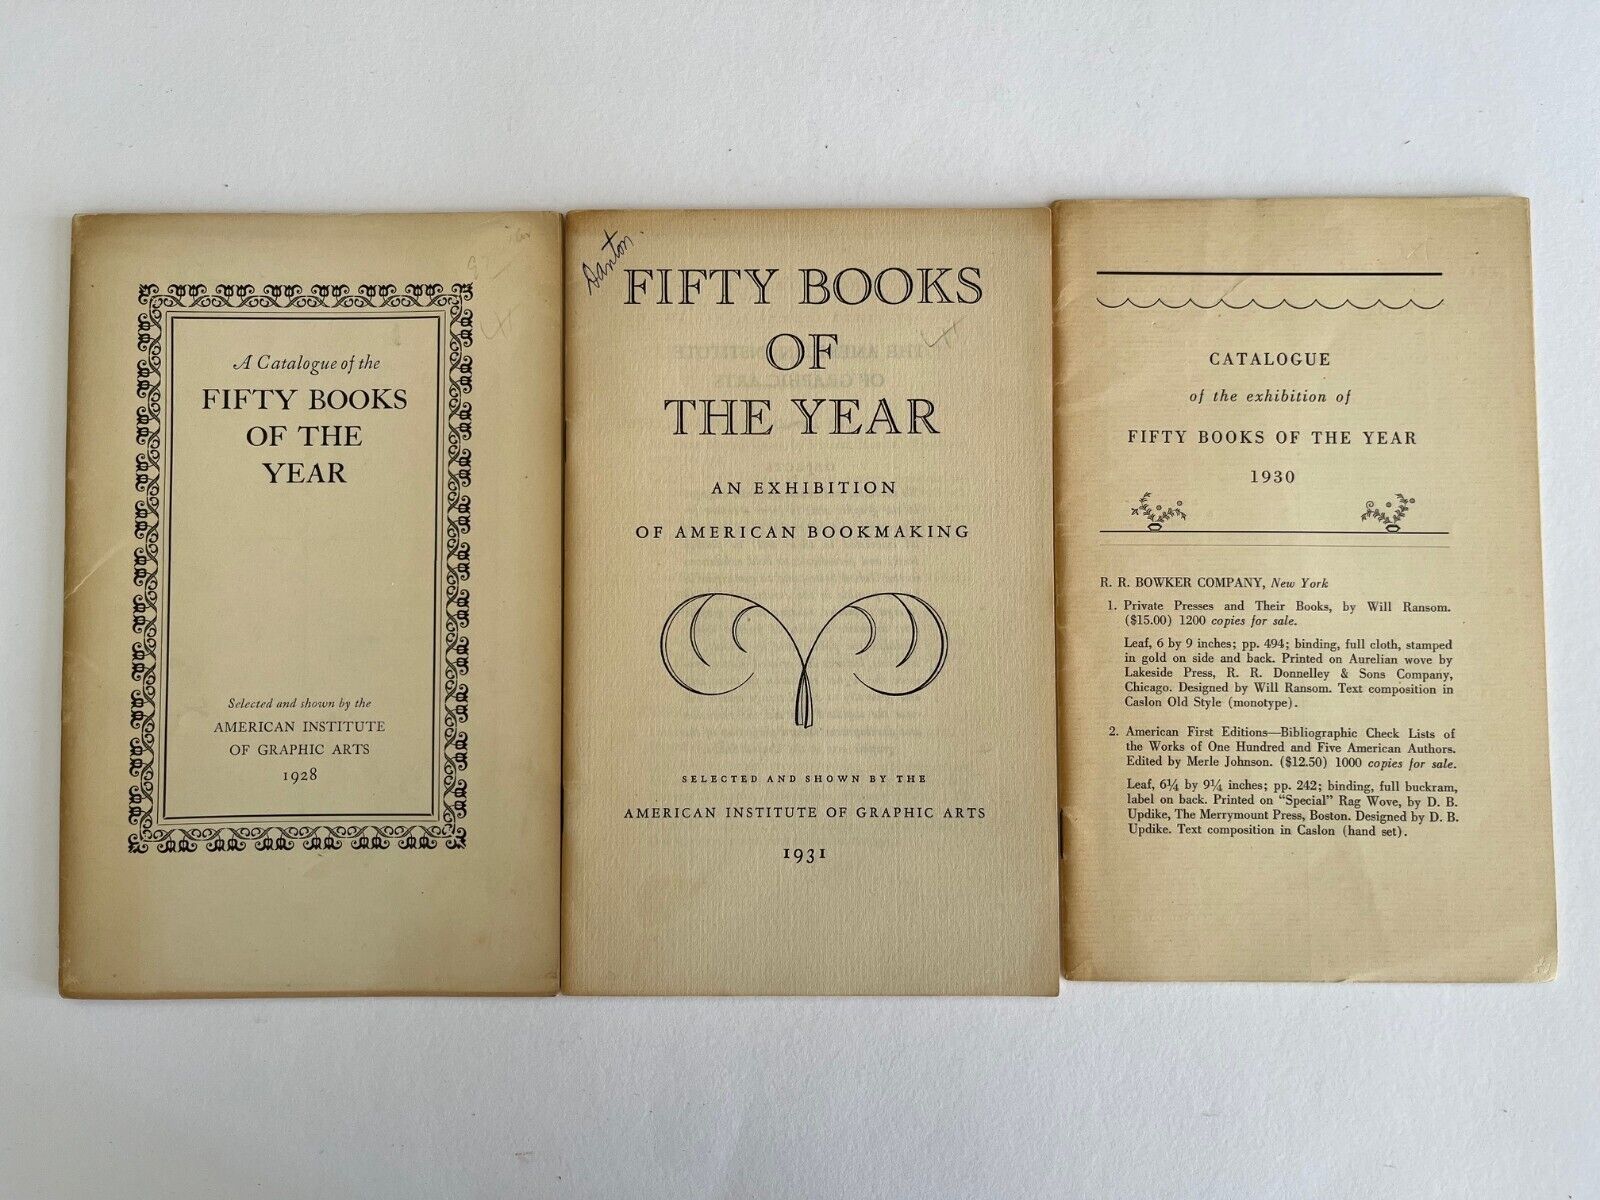 AMERICAN INSTITUTE OF GRAPHIC ARTS / Fifty books of the year 1928 1930 1931 AIGA